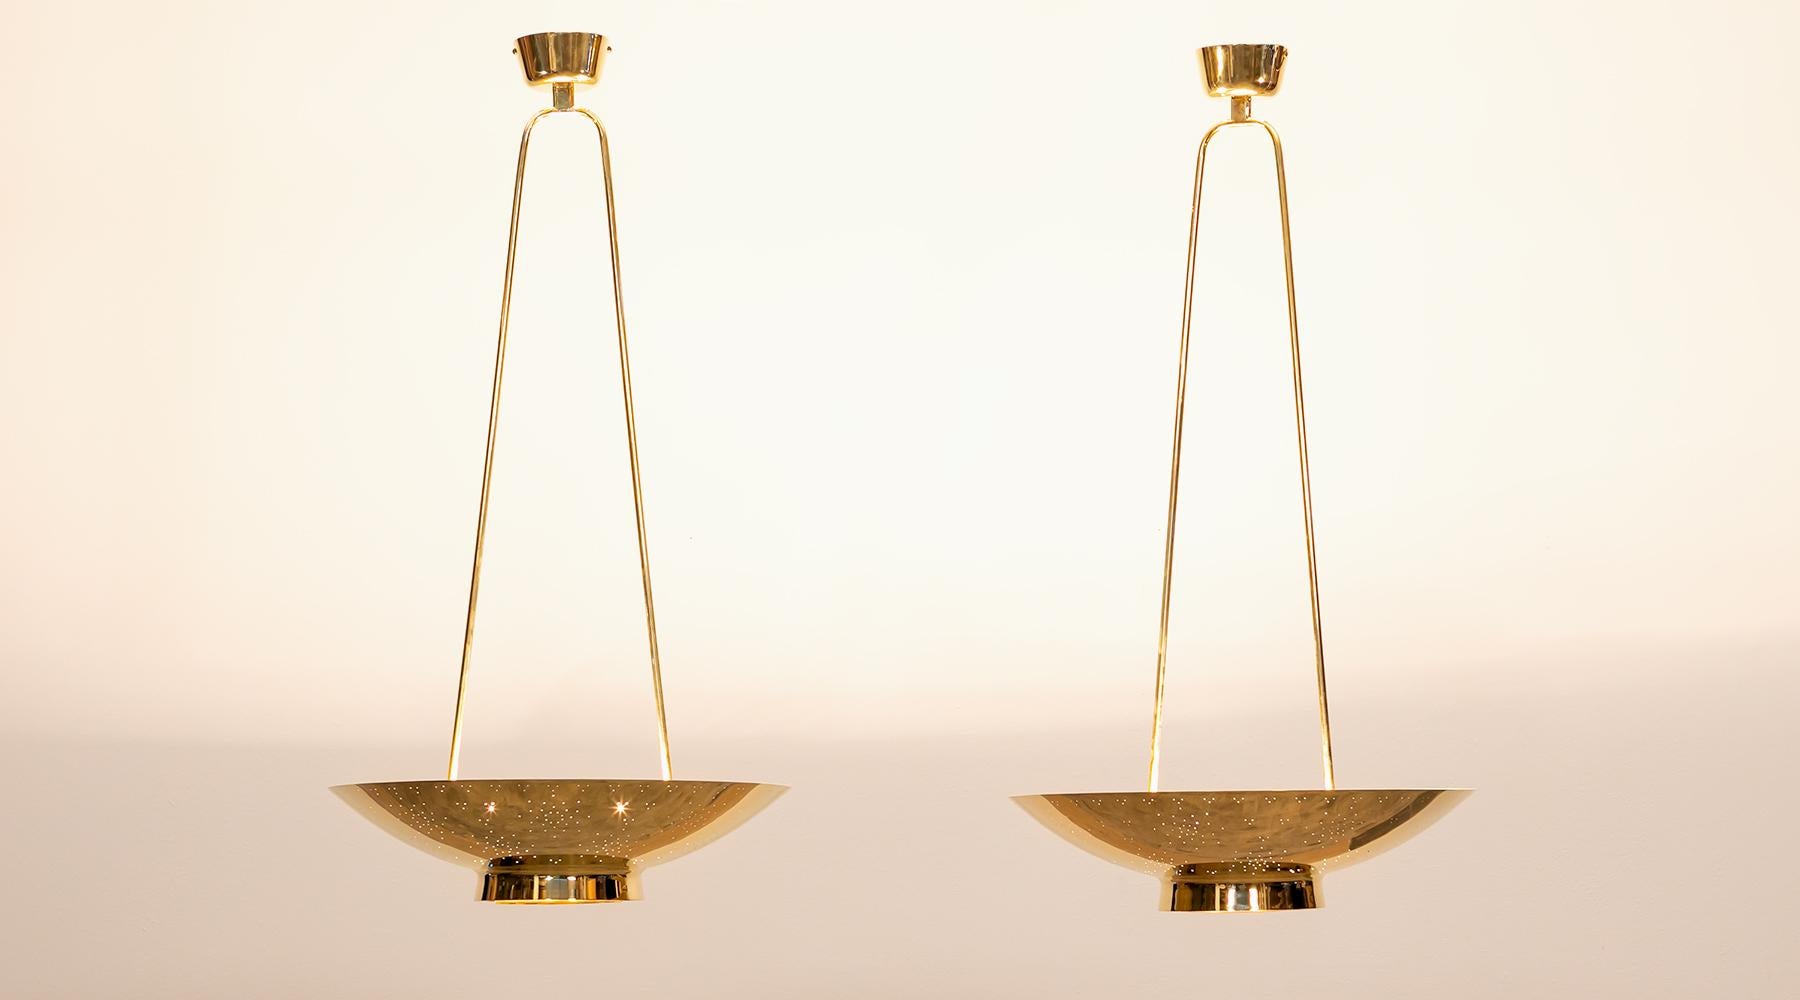 Pair of pendant lamps, brass, Paavo Tynell, Finland, 1955.

Fantastic set of ceiling lamps by Finland classic Paavo Tynell. His cautious hand in light design comes to full effect through this elegant yet unobtrusive set of ceiling lamp with